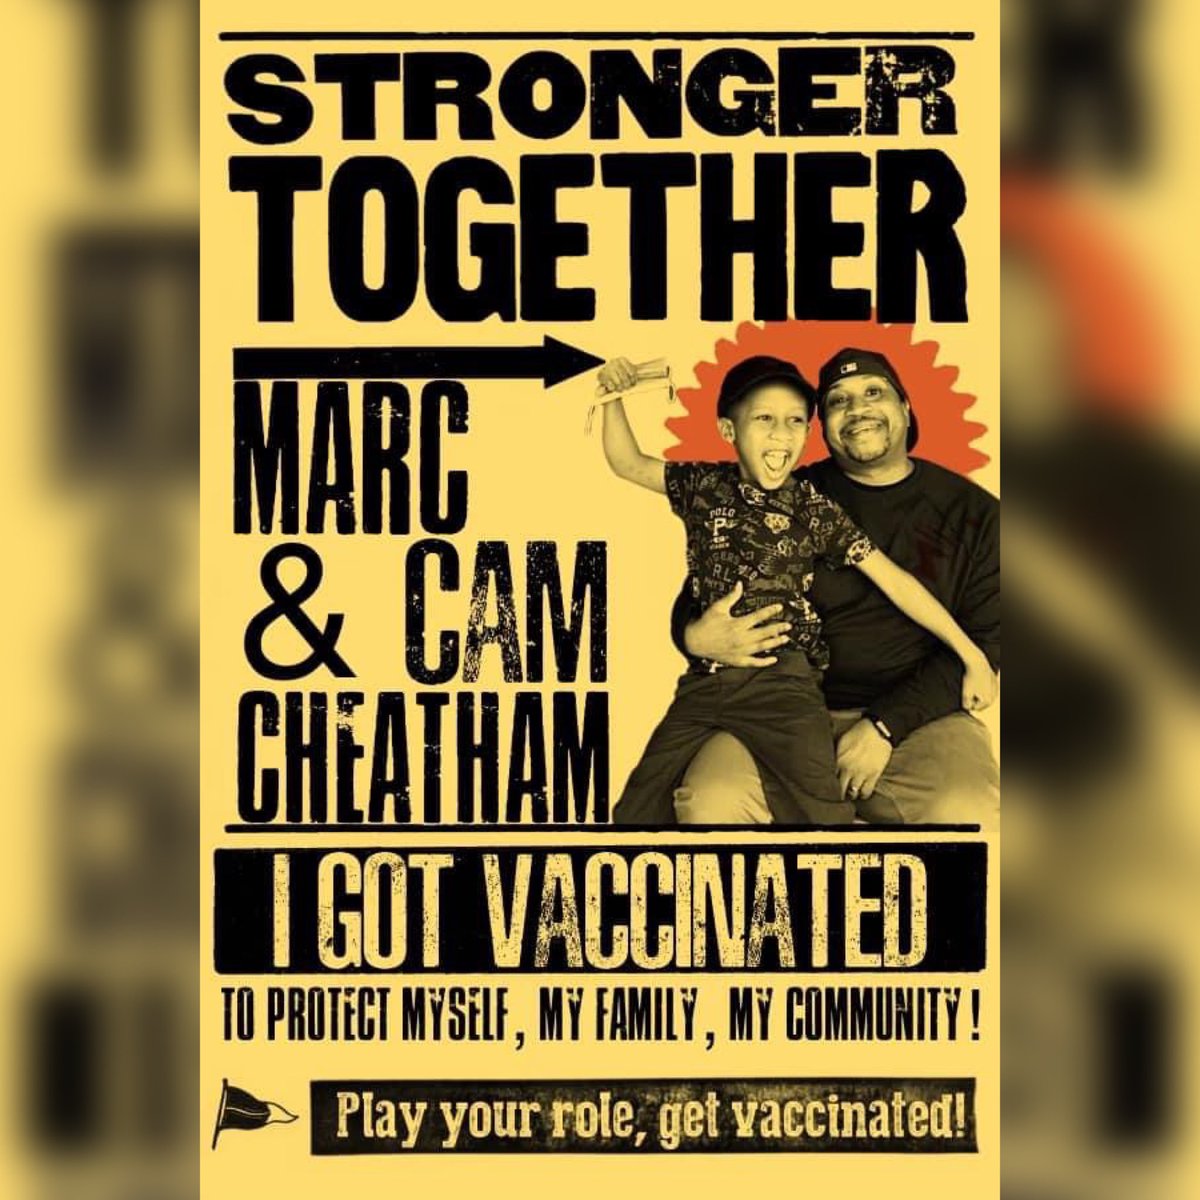 Even tho…we outside - COVID is still with us. People are still being infected, getting sick, going to the hospital and dying. I chose to get vaccinated to do my part to protect my family from the worst. I hope you will decide to join us and get vaccinated.